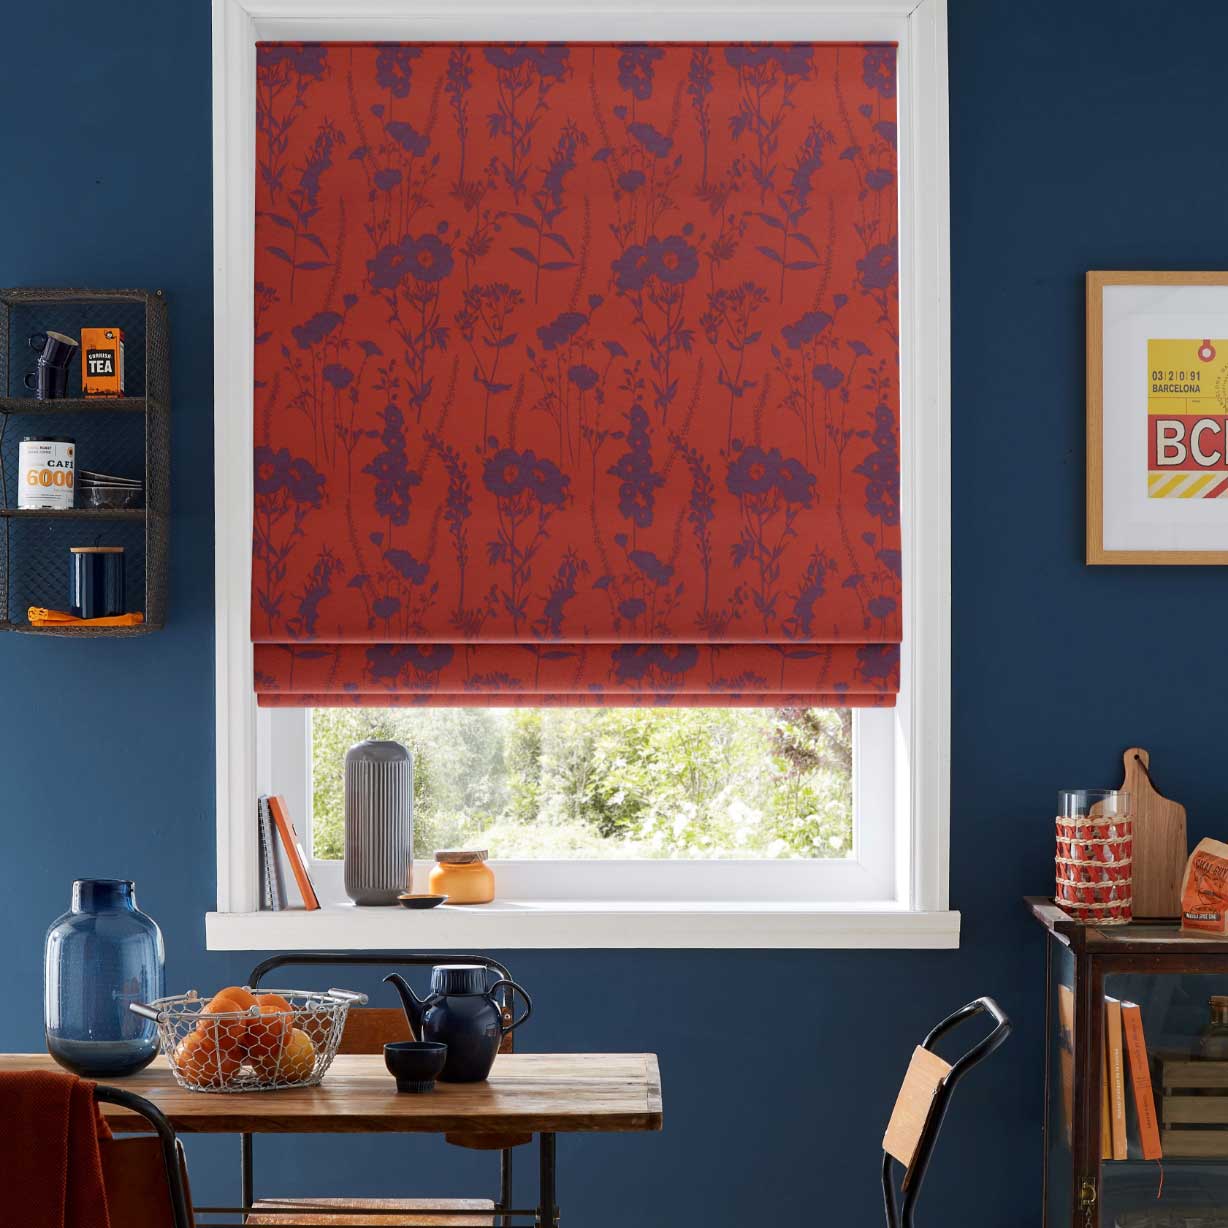 Red and purple floral print Roman Blinds in navy kitchen